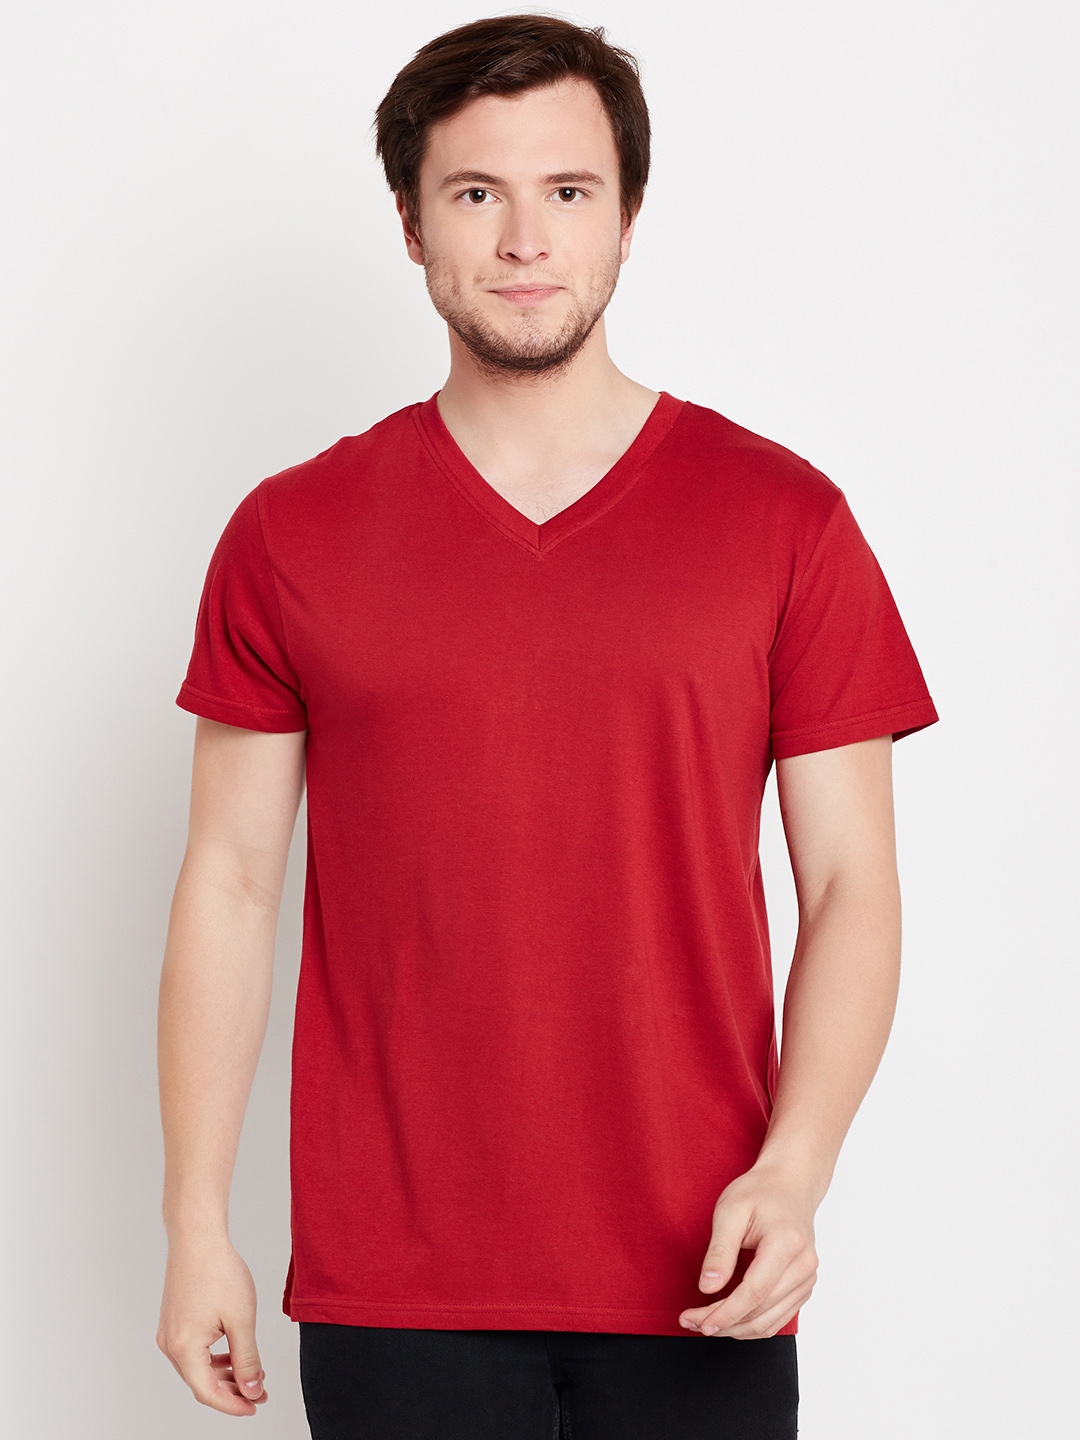 Buy Hanes Red Solid Lounge T Shirt MPH75 125 - Lounge Tshirts for Men ...